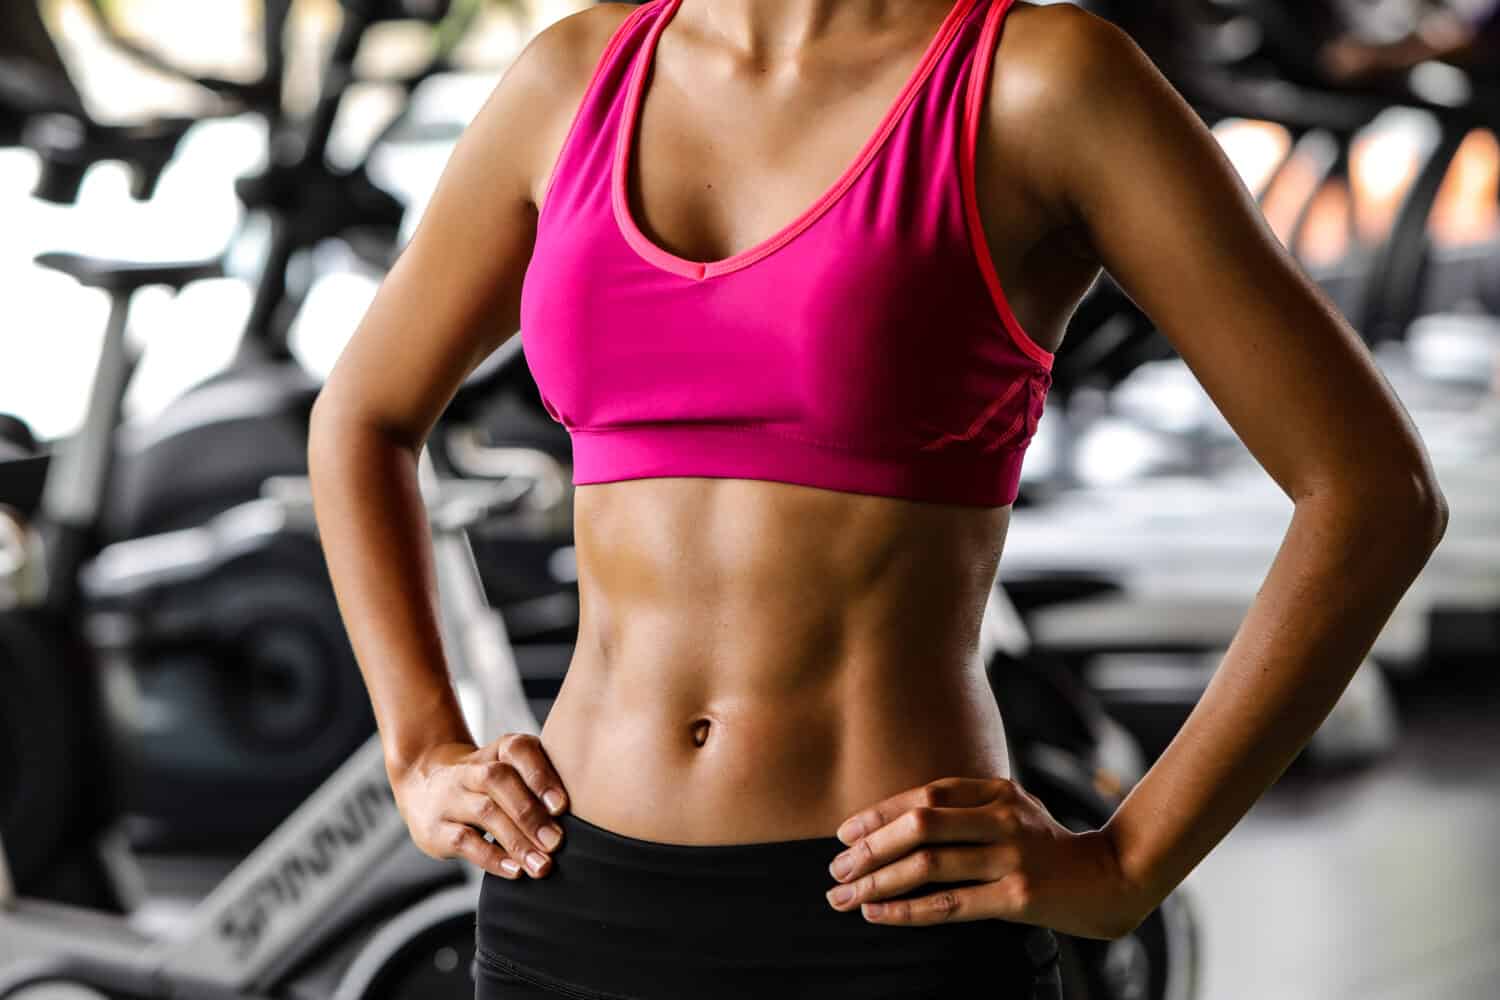 Close-up of a woman's body bodybuilder in the gym. Portrait of muscular woman showing Strong abs on professinal gym background. Beautiful abdominal muscle.